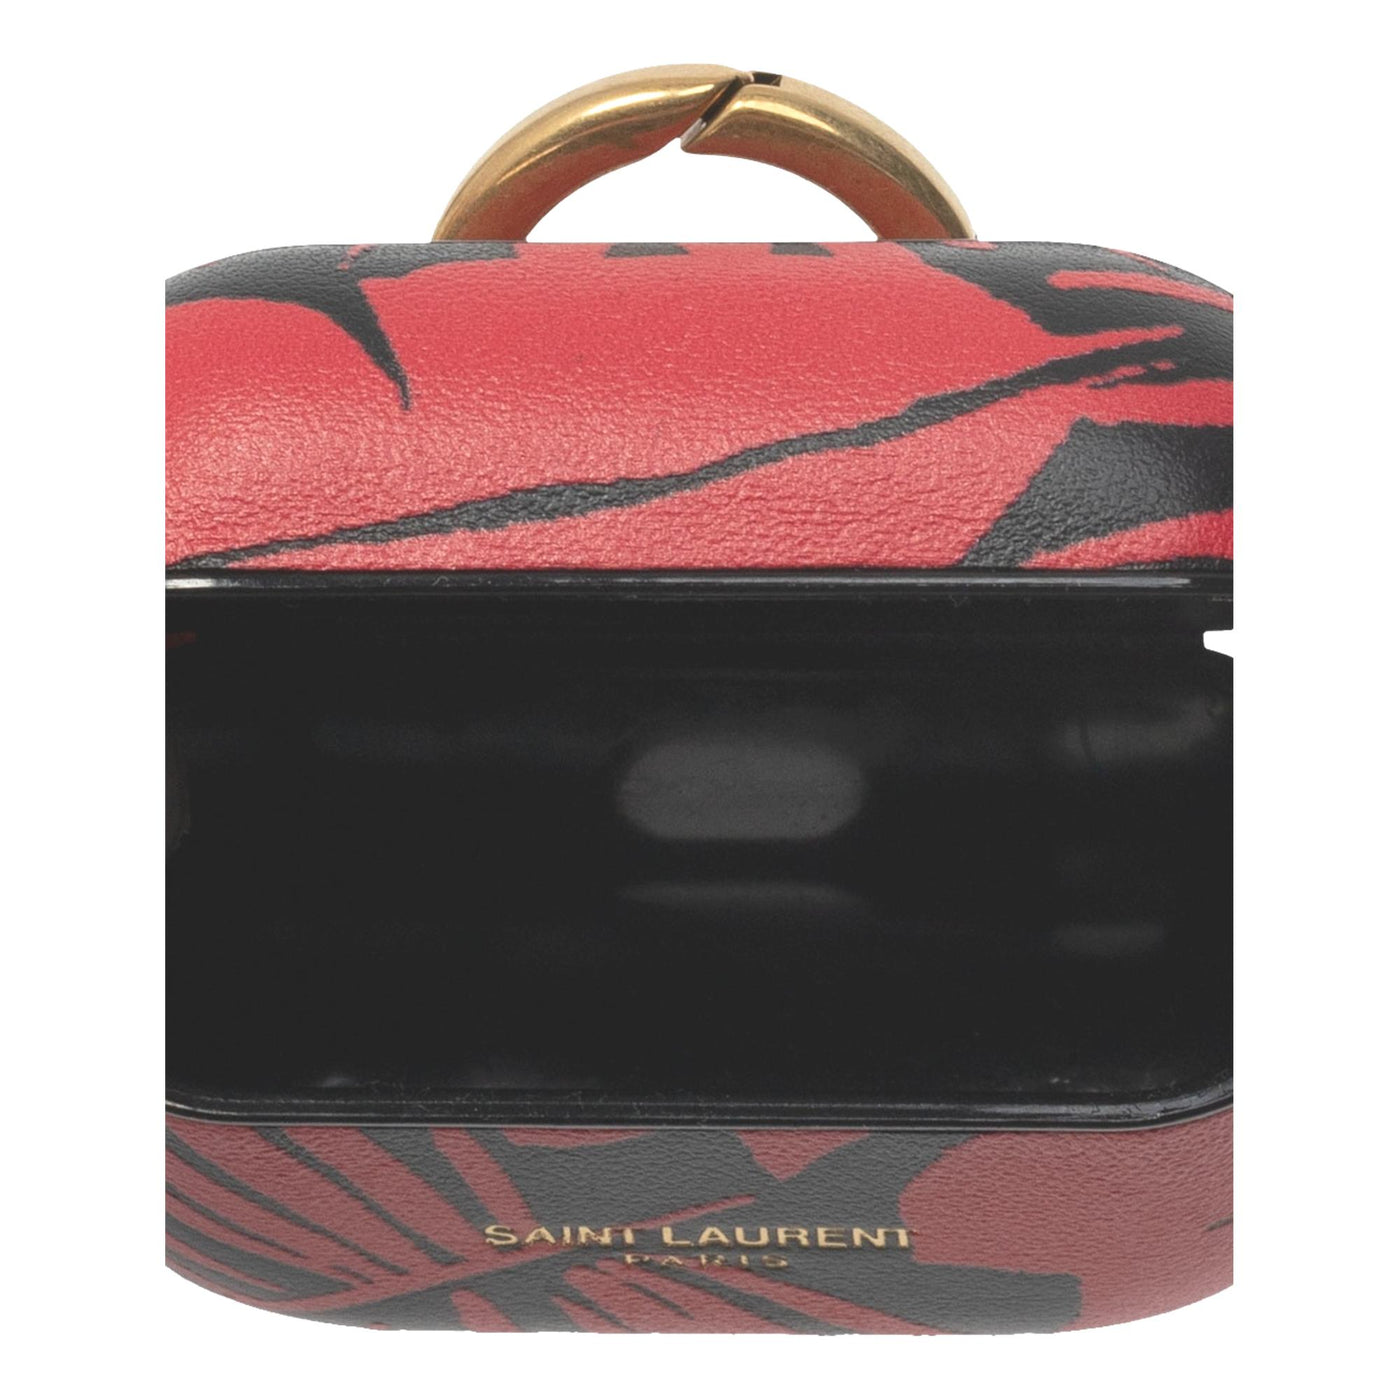 Saint Laurent Abstract Print Black and Red Leather Airpods Pro Case 641954 - LUXURYMRKT